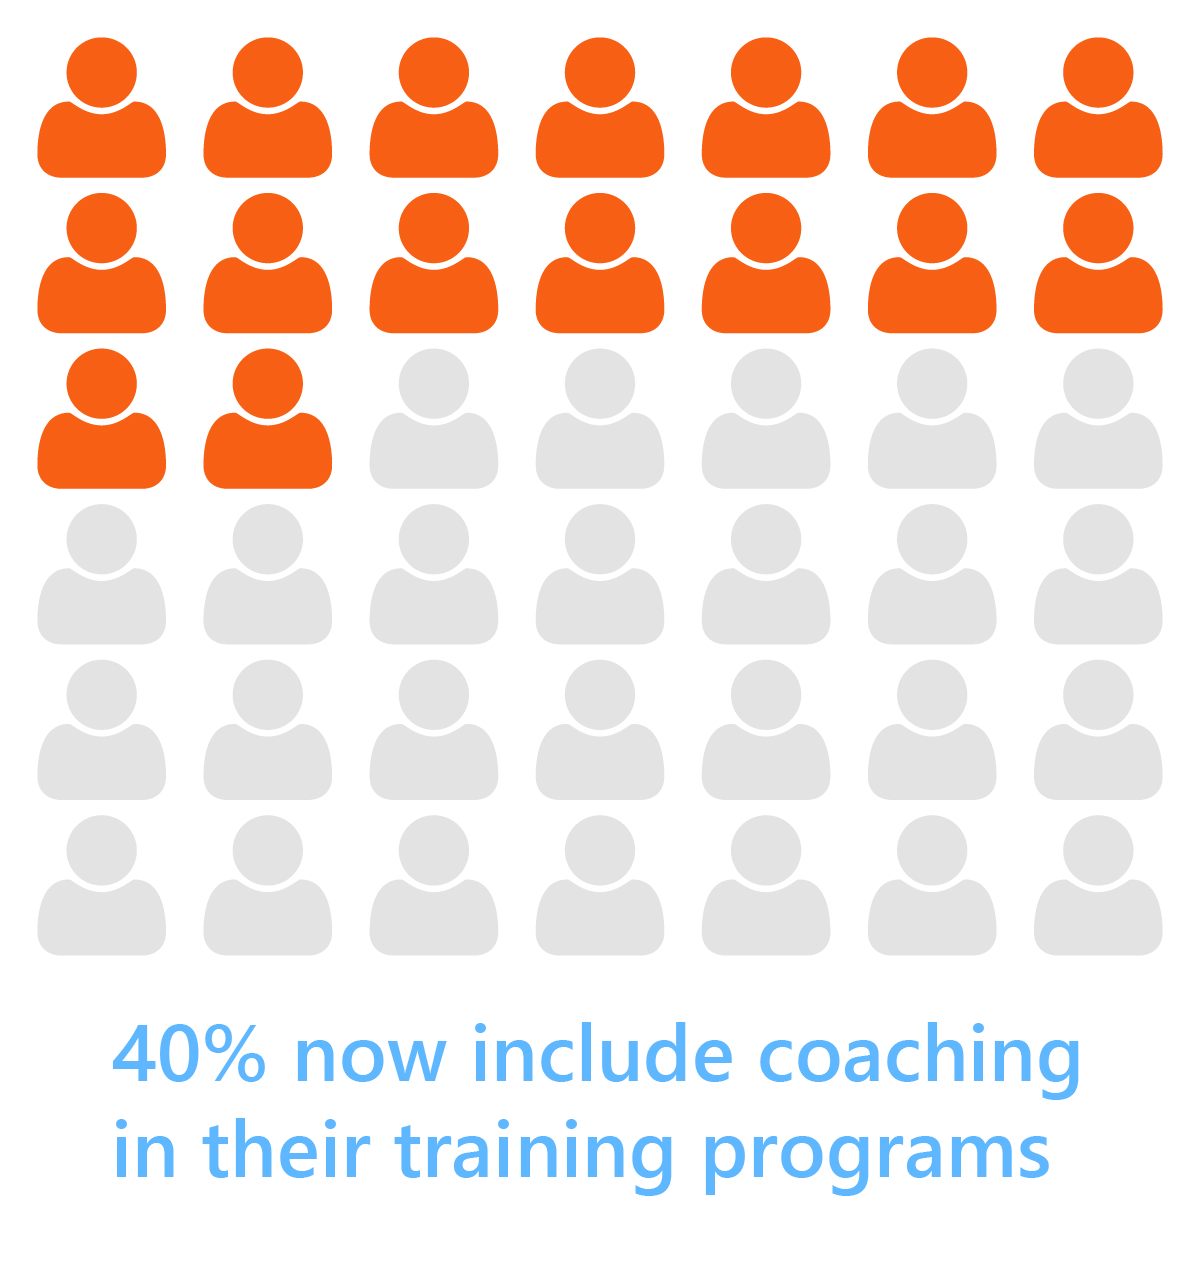 More and more companies are recognizing that coaching is key to a well established safety culture.